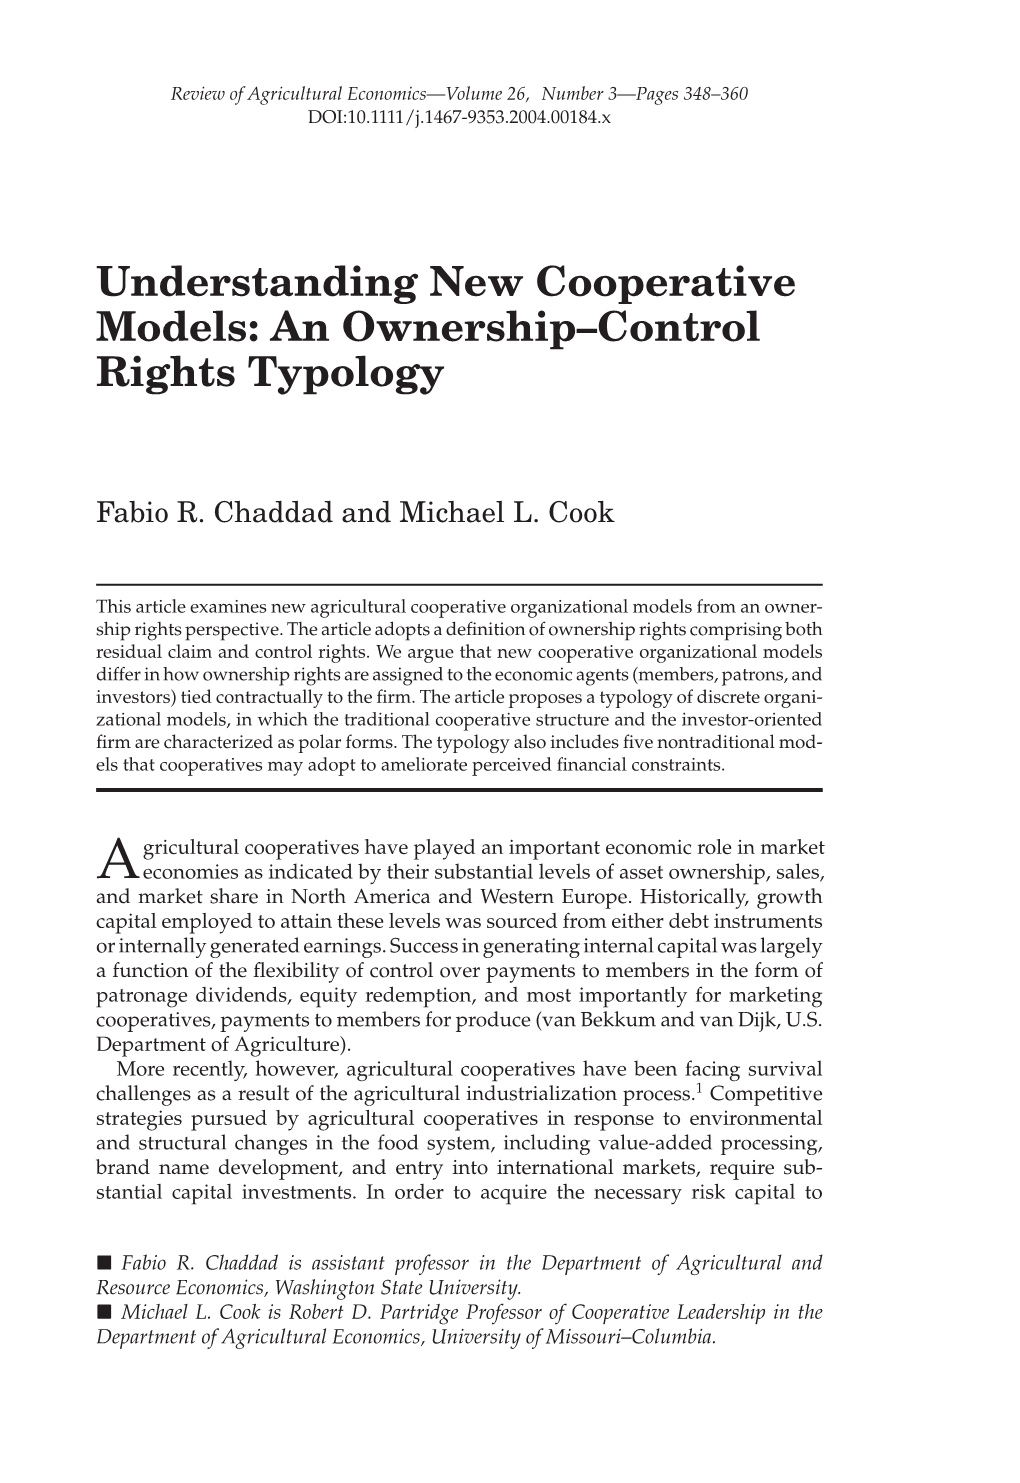 Understanding New Cooperative Models: an Ownership–Control Rights Typology